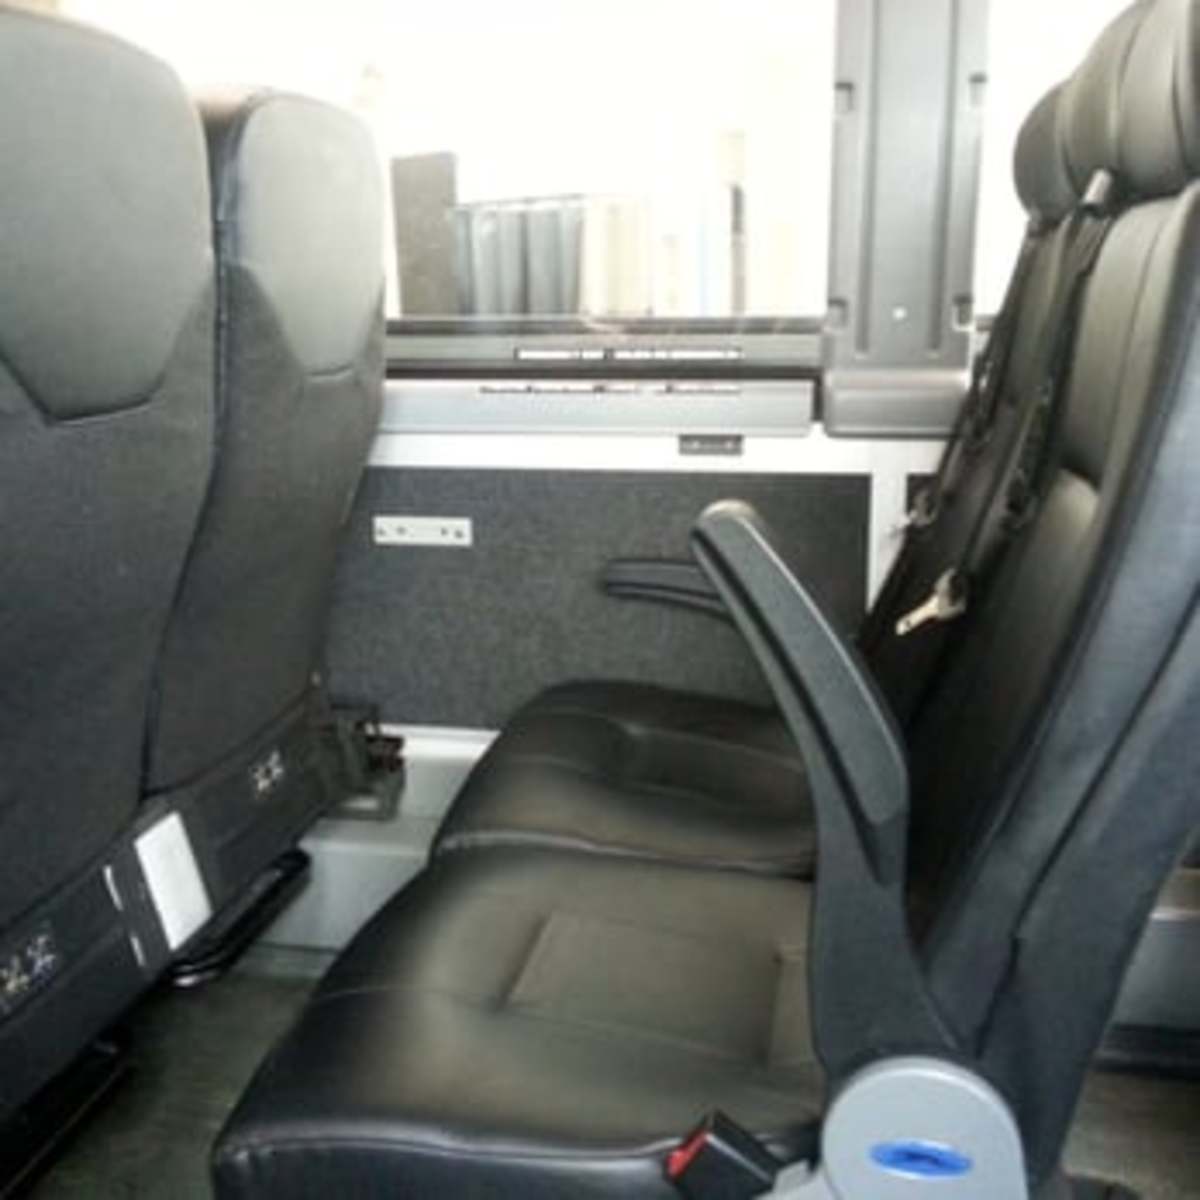 the truth about the power outlets on the greyhound bus | hubpages